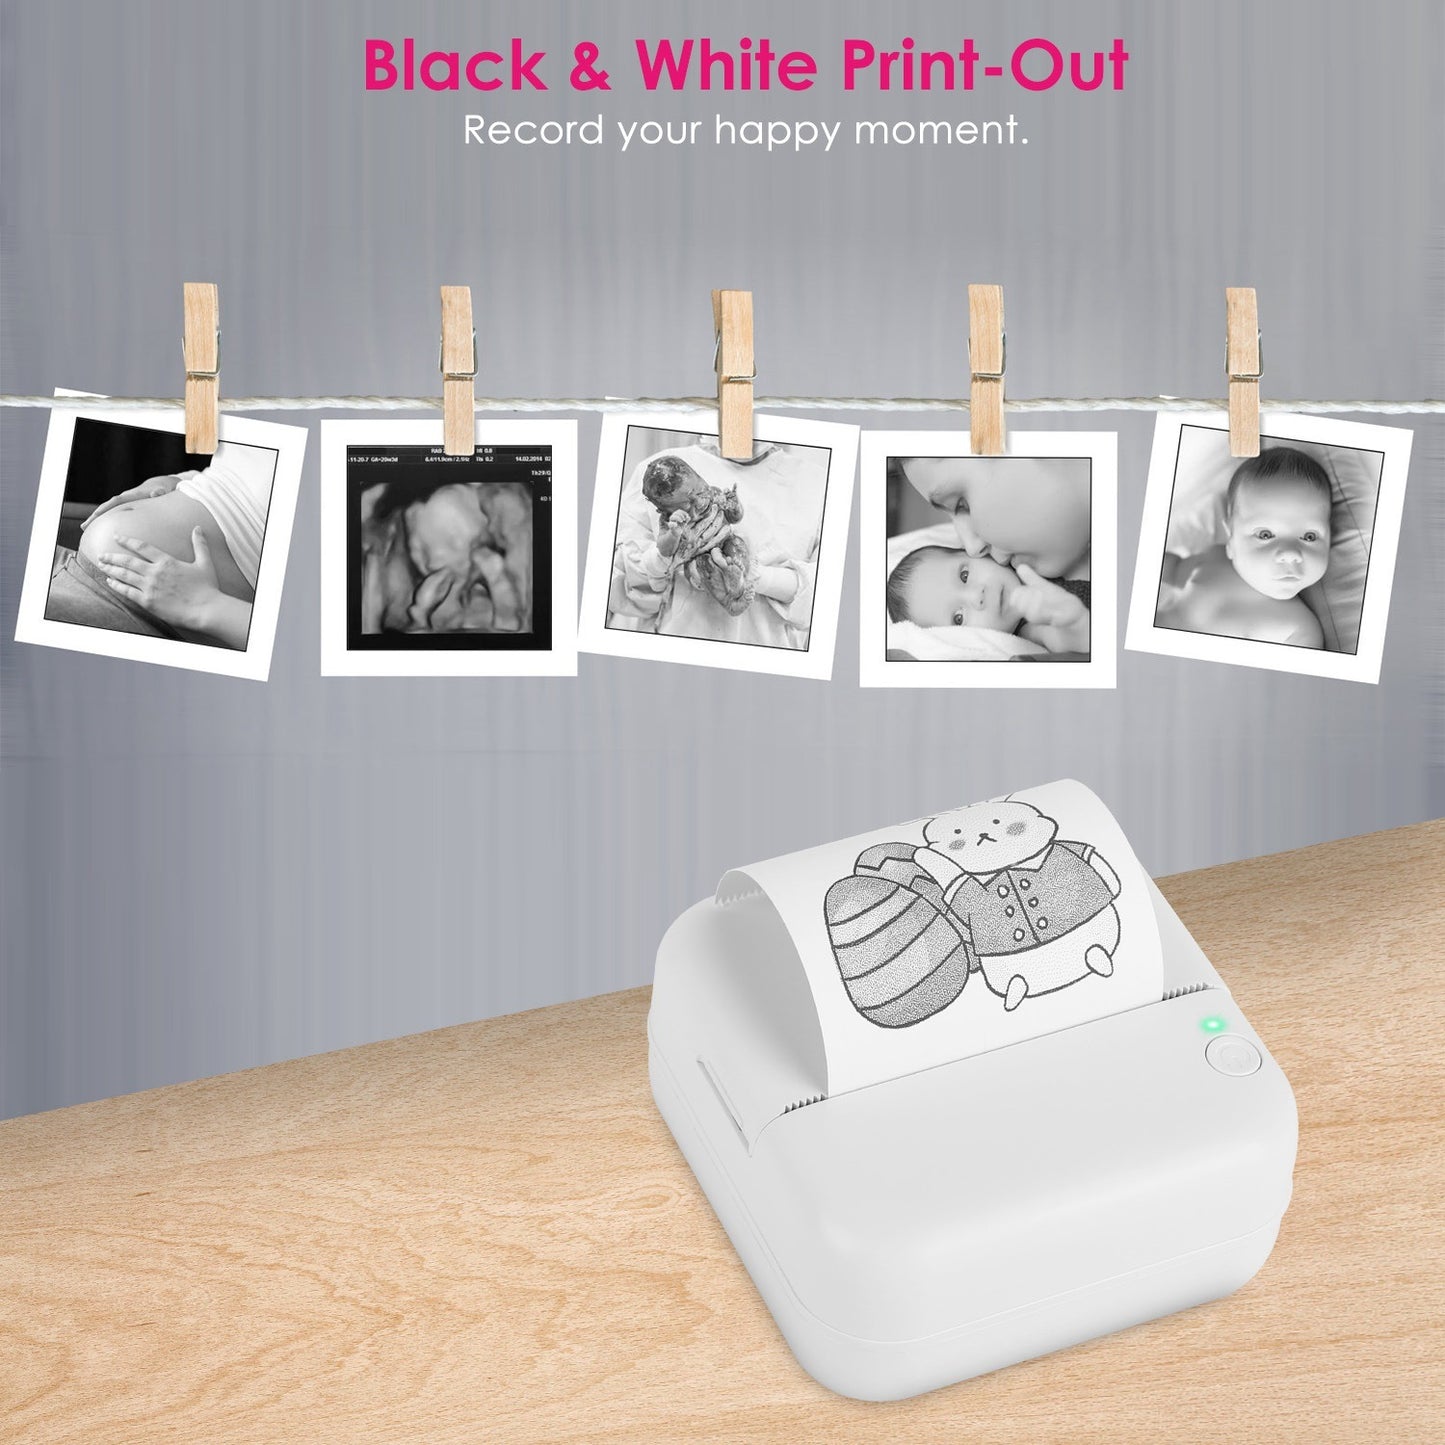 Pocket Wireless Thermal Printer Portable Mini Sticker Maker Machine Rechargeable Inkless Photo Printer for Printing Label Journal Study Notes Memo Photos